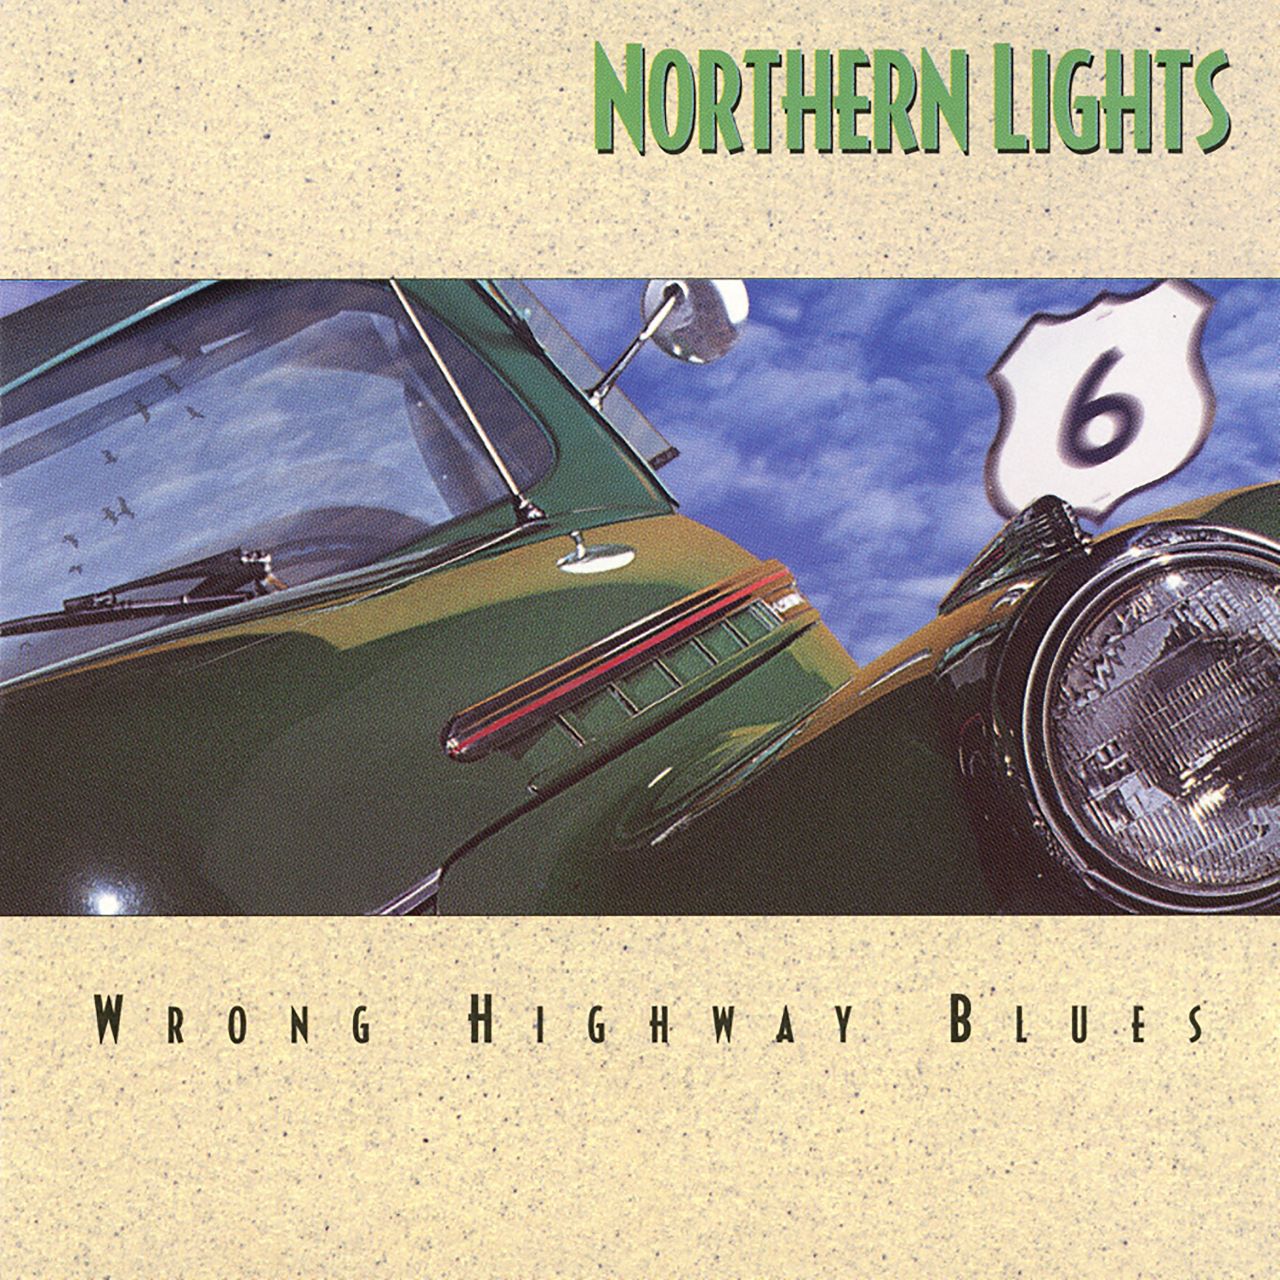 Northern Lights – Wrong Highway Blues cover album